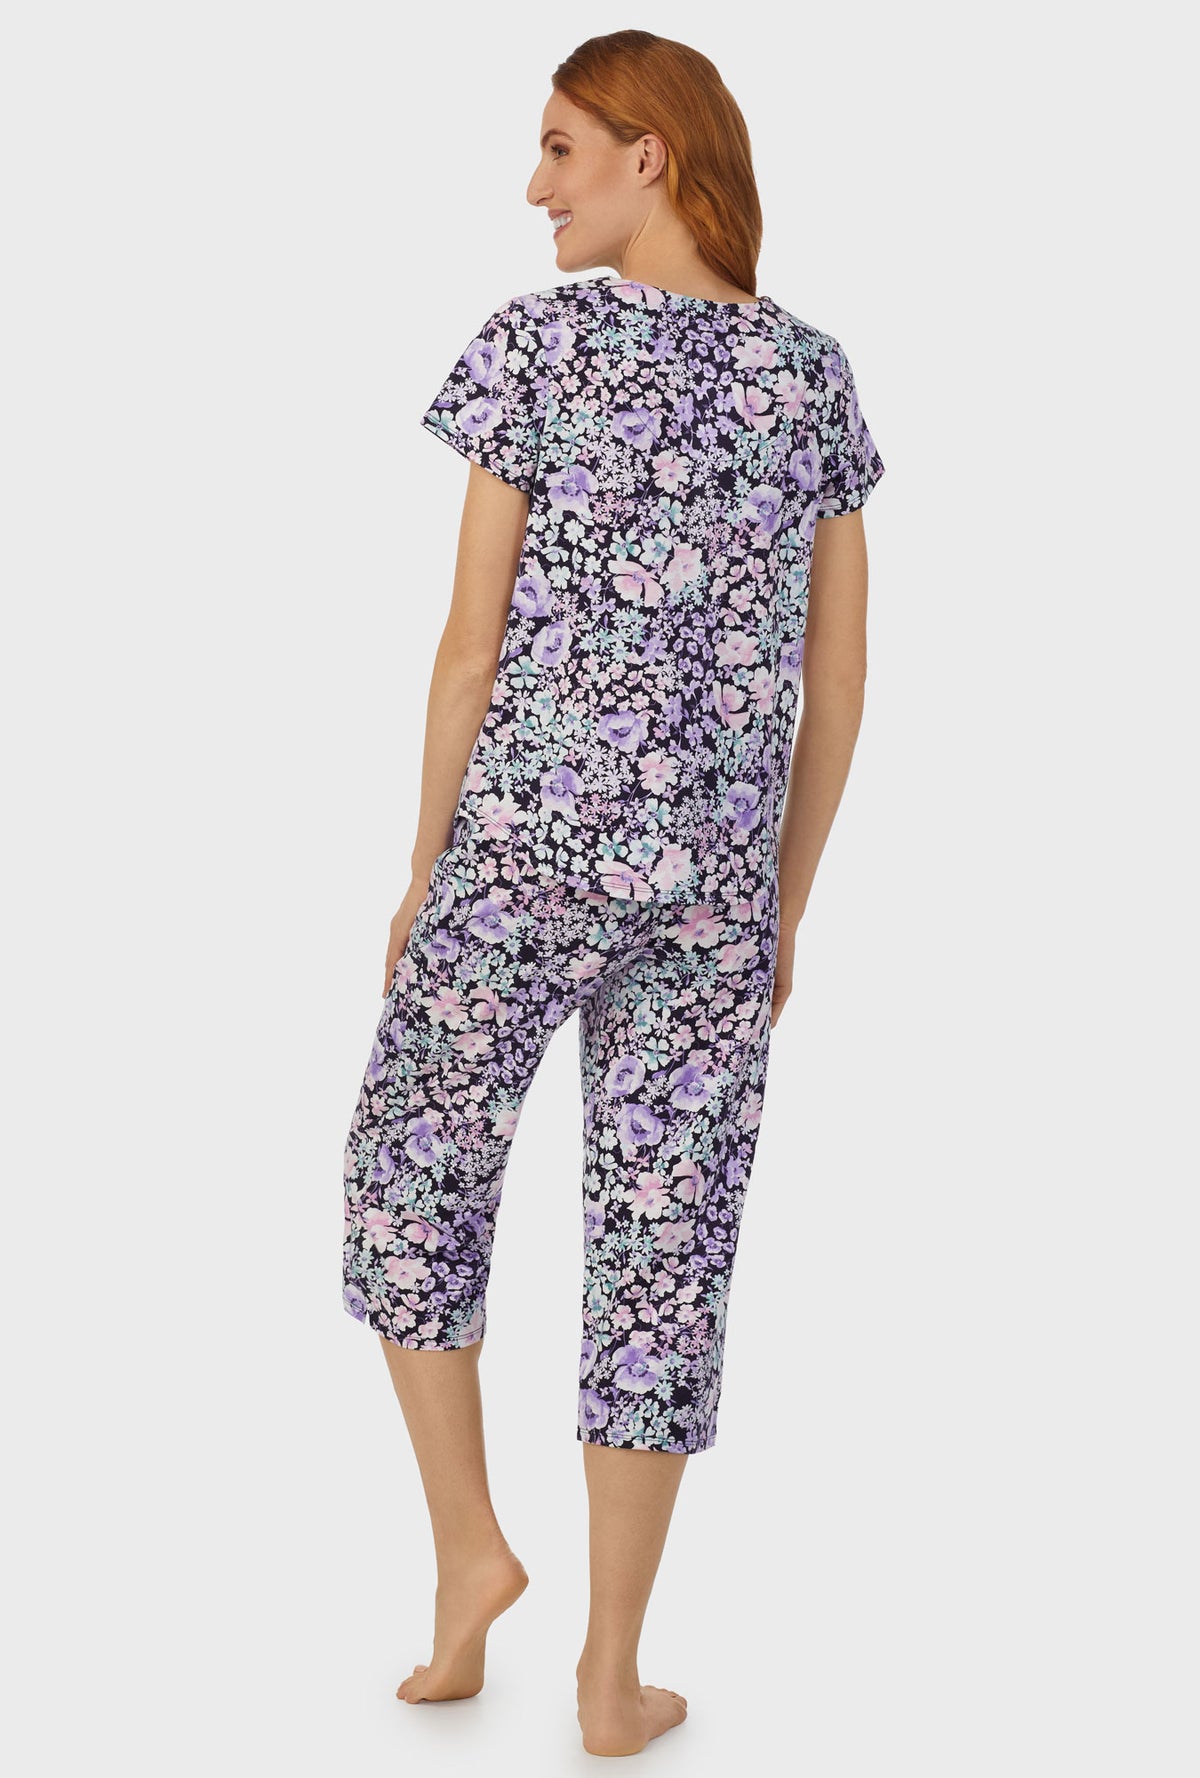 A lady wearing navy short sleeve capri pant pj set  with midnight blue floral print.